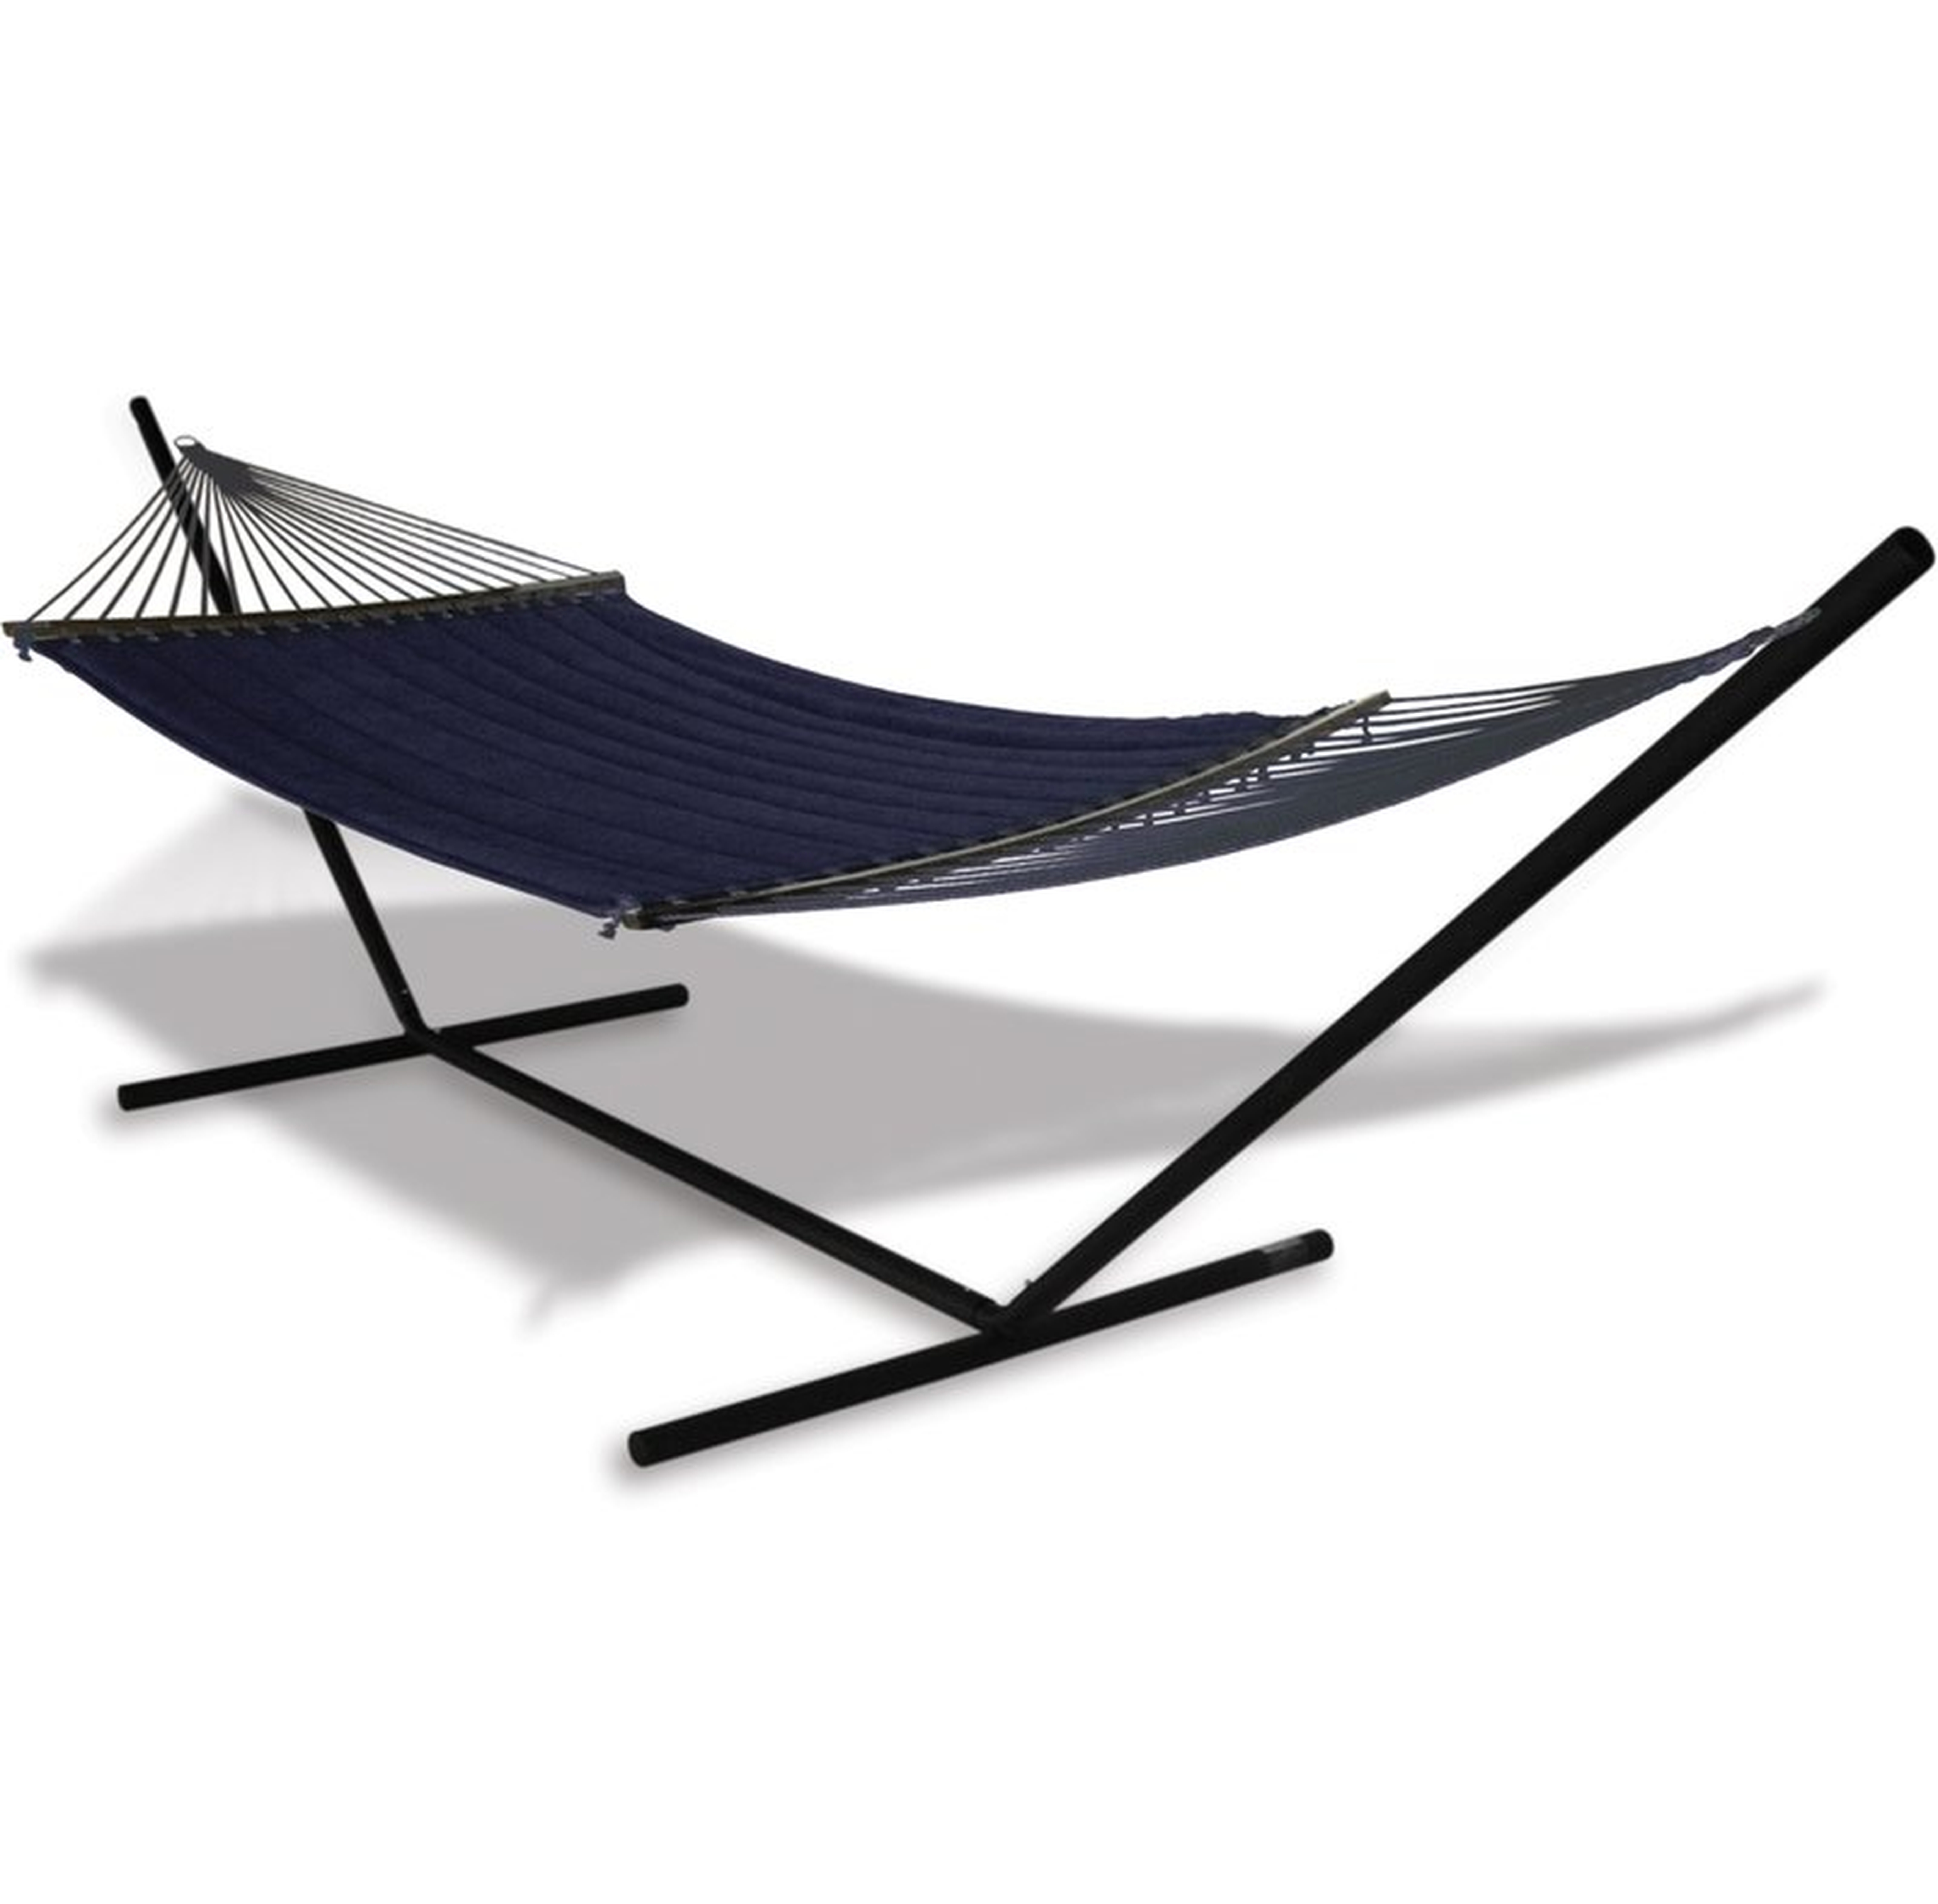 Spicer Olefin Hammock with Stand; Back in Stock Oct 6, 2020. - Wayfair